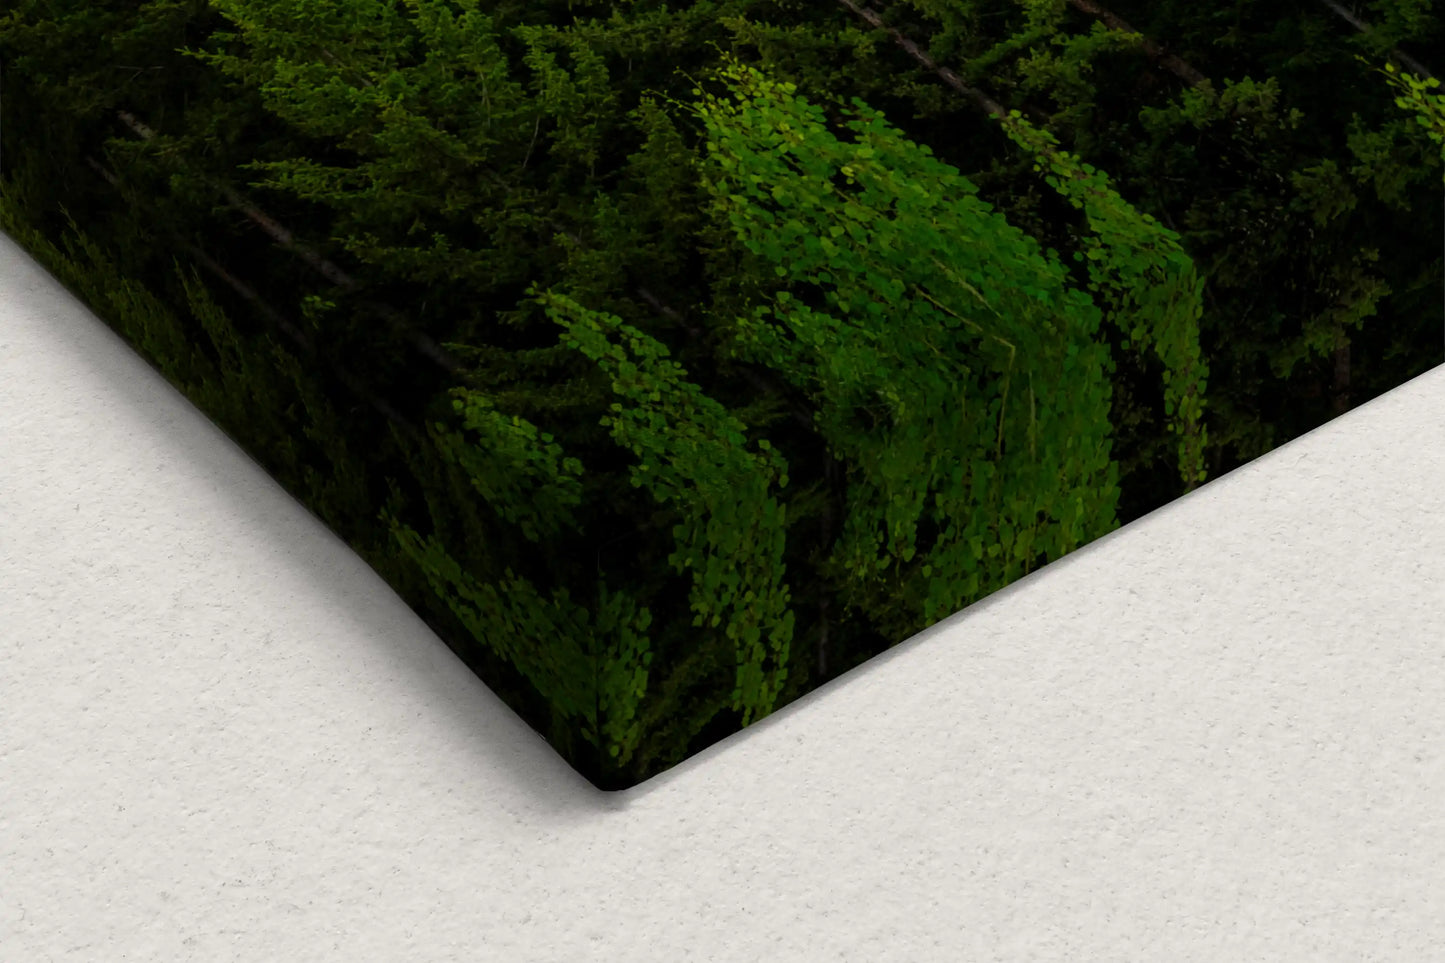 Detail of canvas edge with a lush green forest from the Teton Mountains and Snake River artwork.